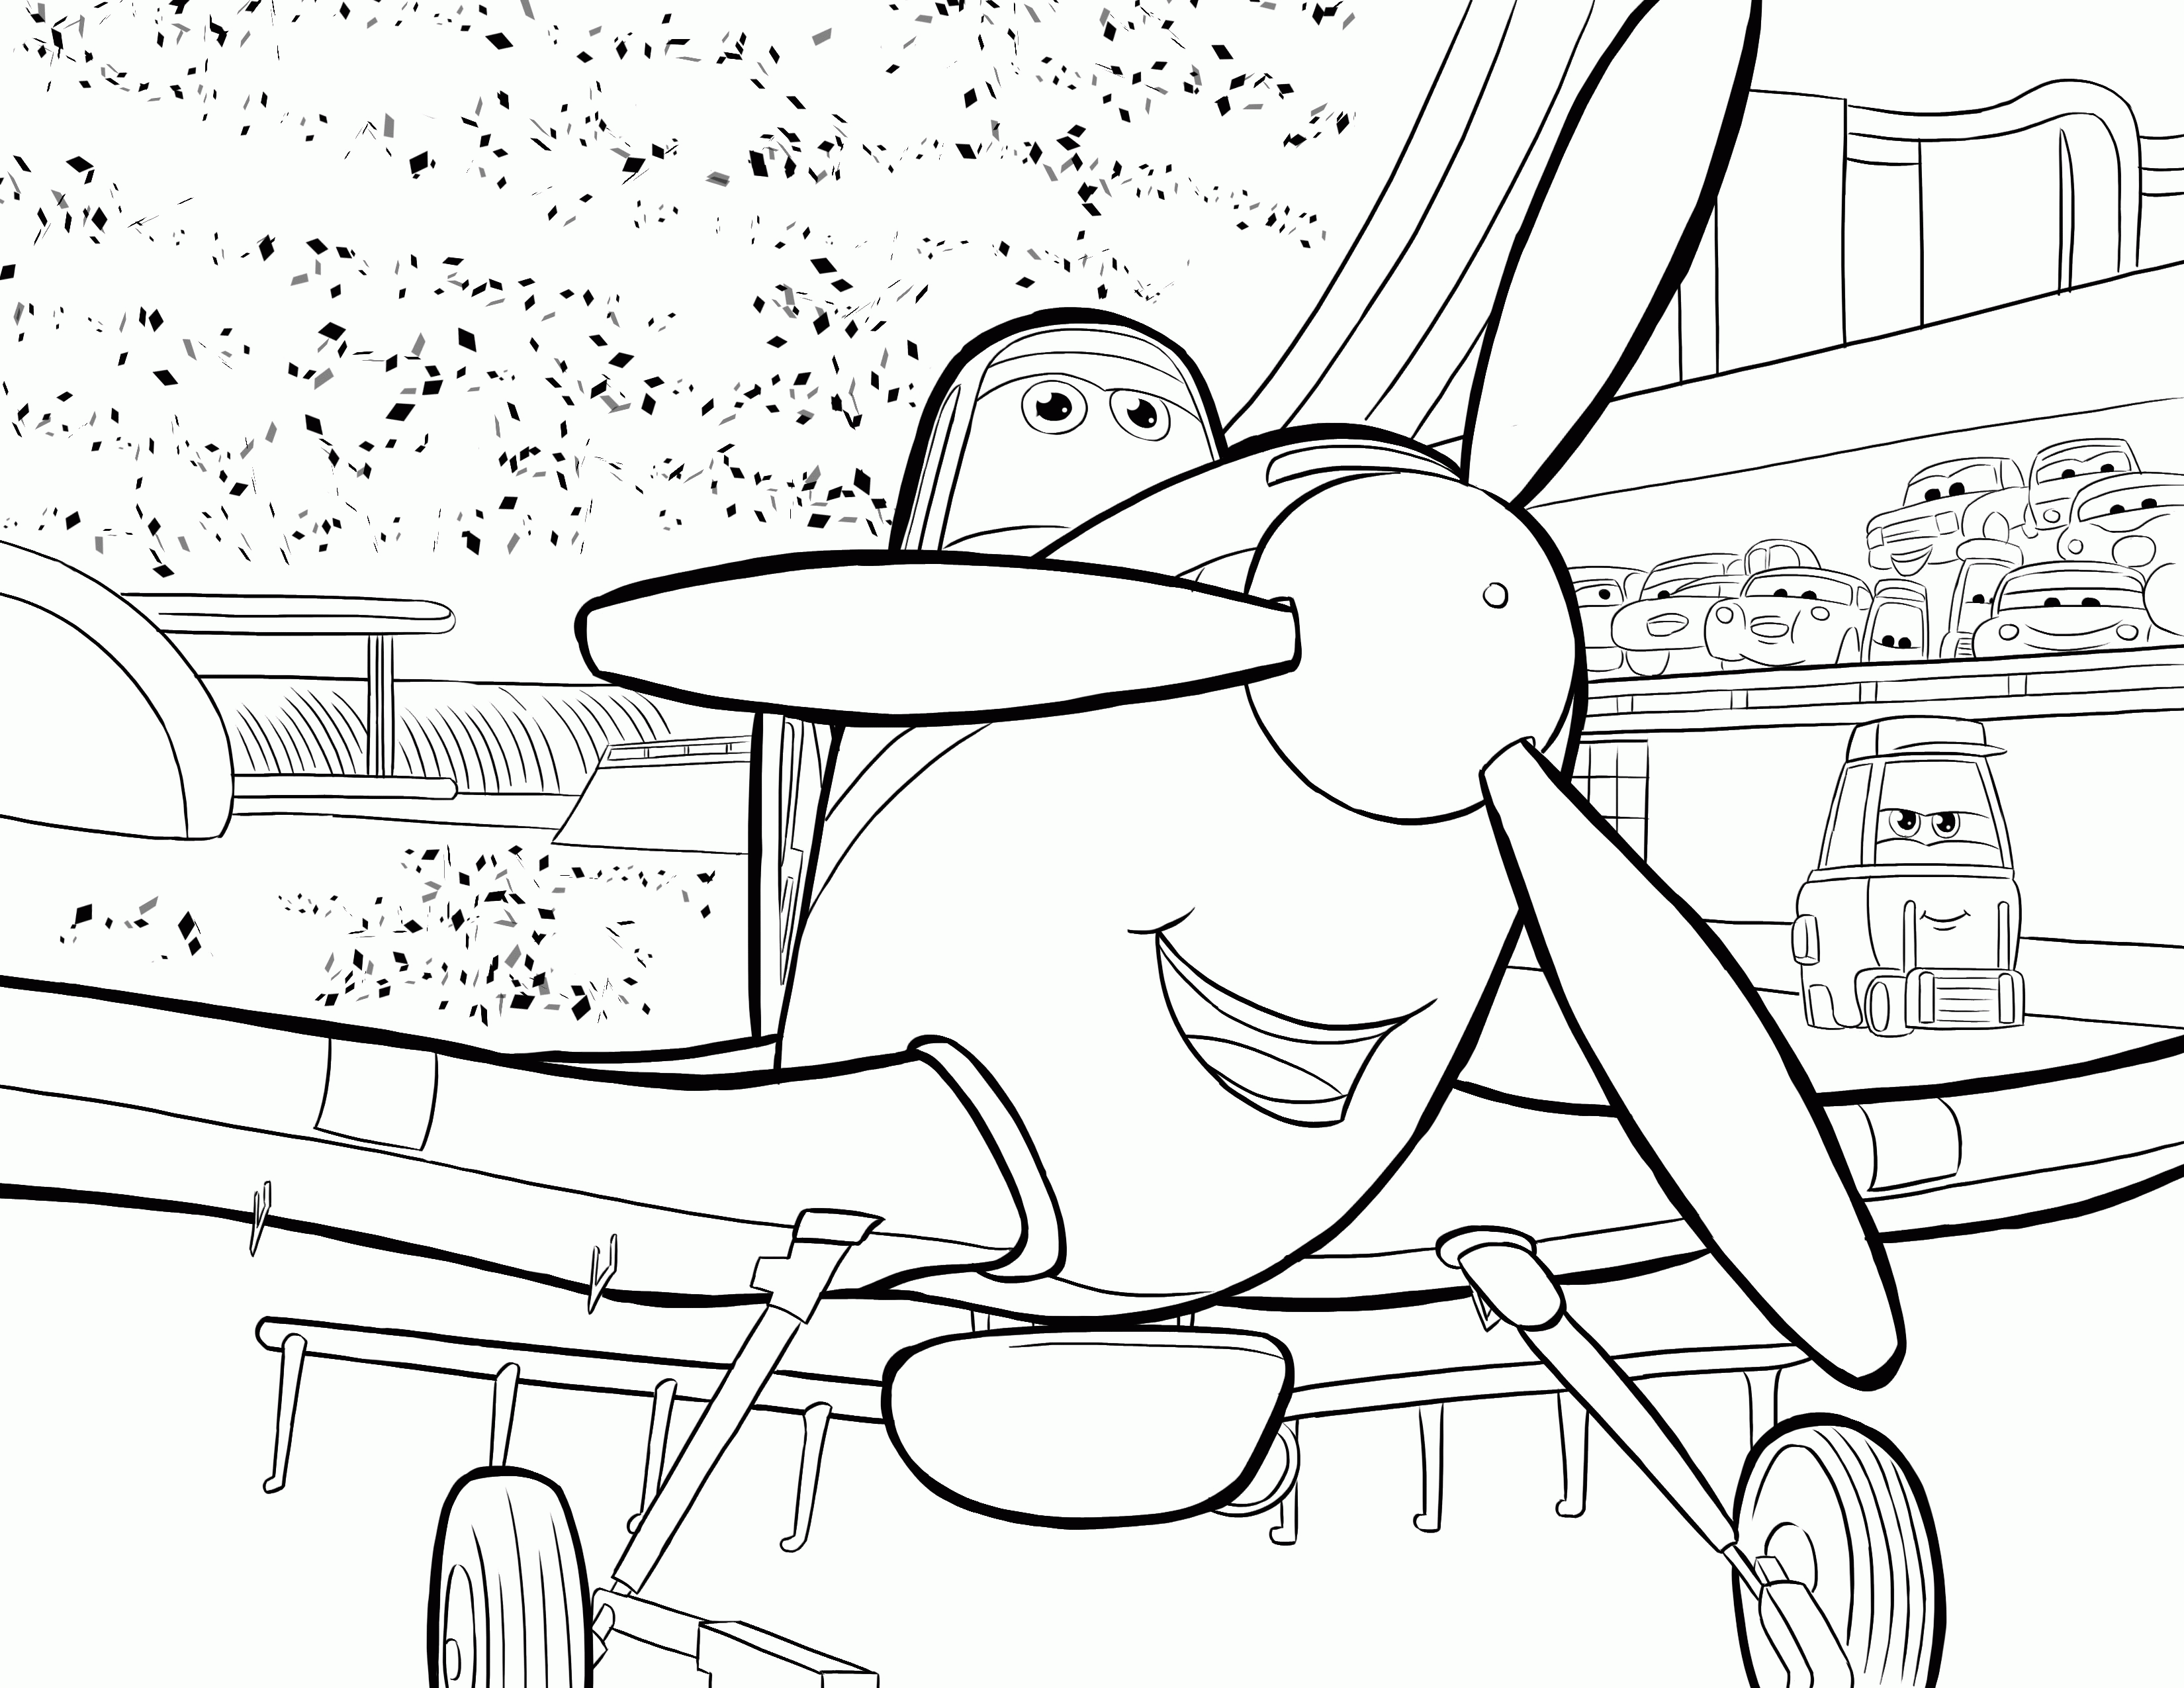 Free Planes Trains And Automobiles Coloring Pages Download Free Planes Trains And Automobiles Coloring Pages Png Images Free Cliparts On Clipart Library